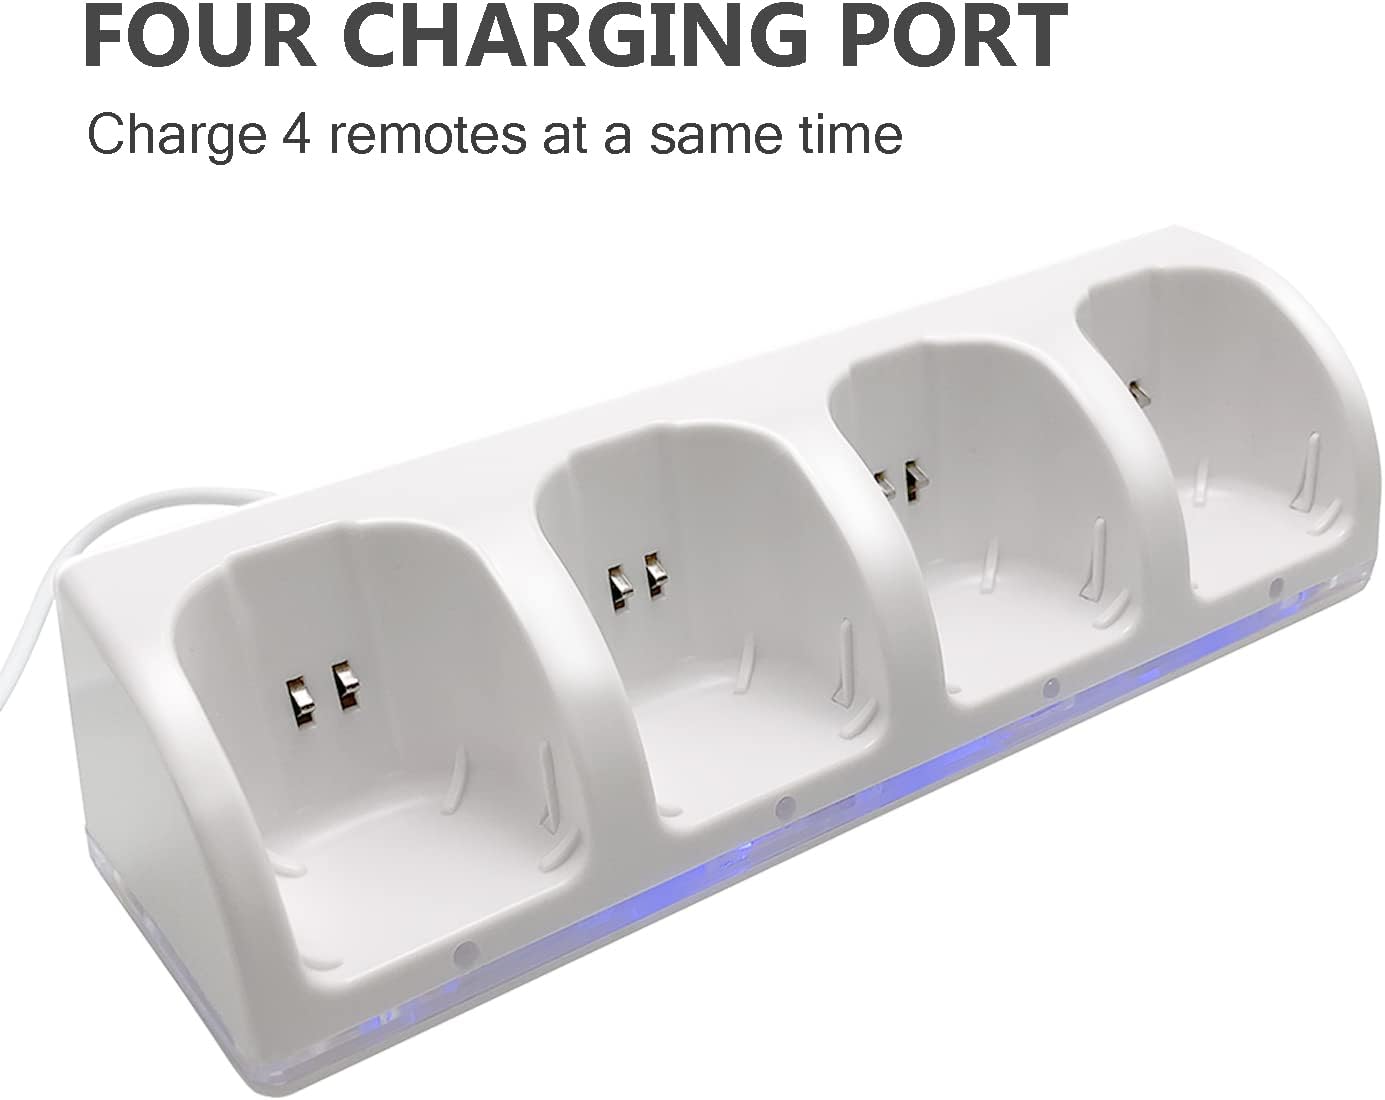 4-in-1 Charging Station for Wii&Wii U Remote Controller,Charger with 4 Rechargeable Battery Packs (4 Port Charging Station+4 pcs 2800mAh Replacement Batteries+USB Cable),Remote Not Included